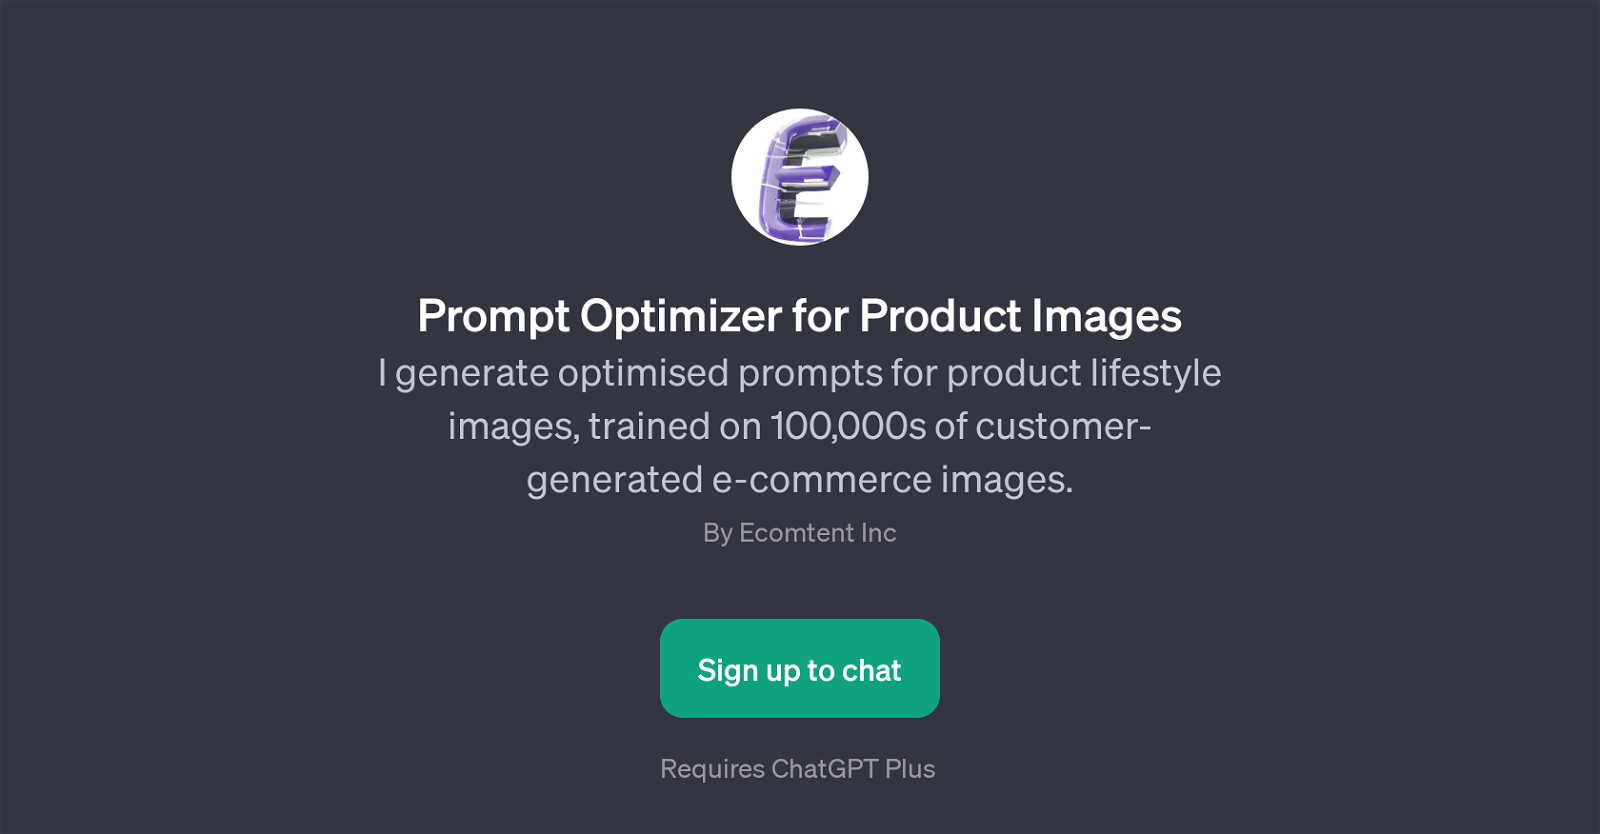 Prompt Optimizer for Product Images website